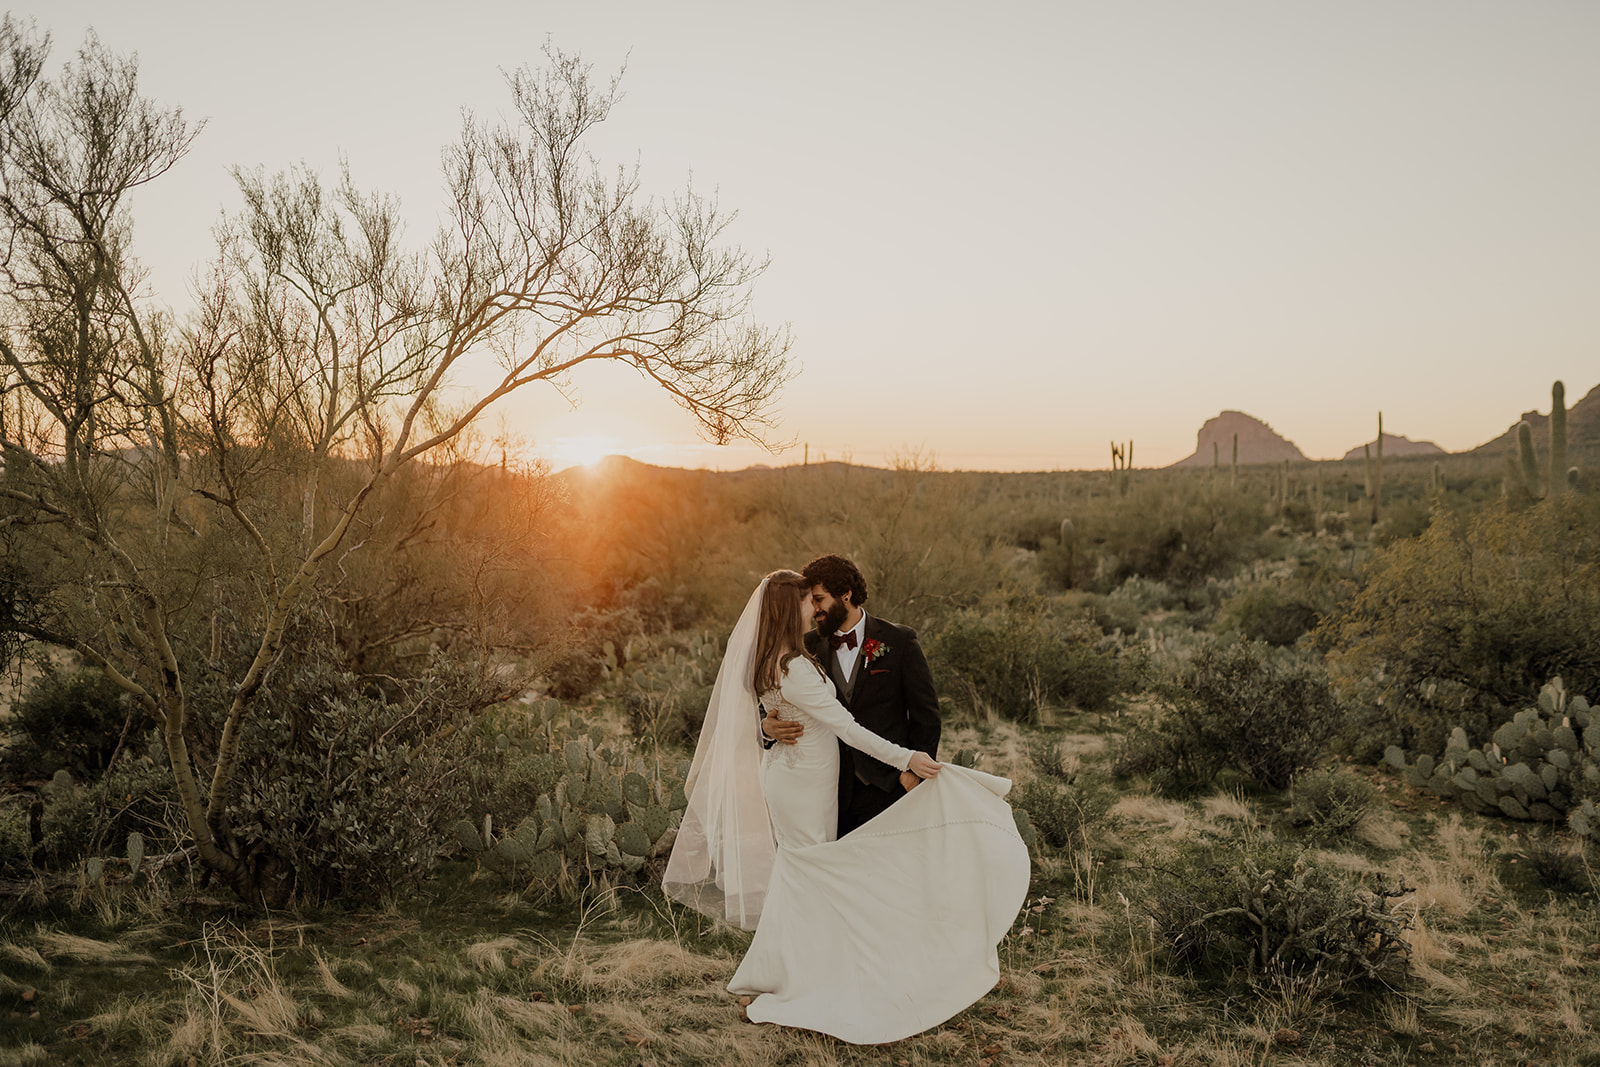 Bride and groom at their desert elopement in Arizona